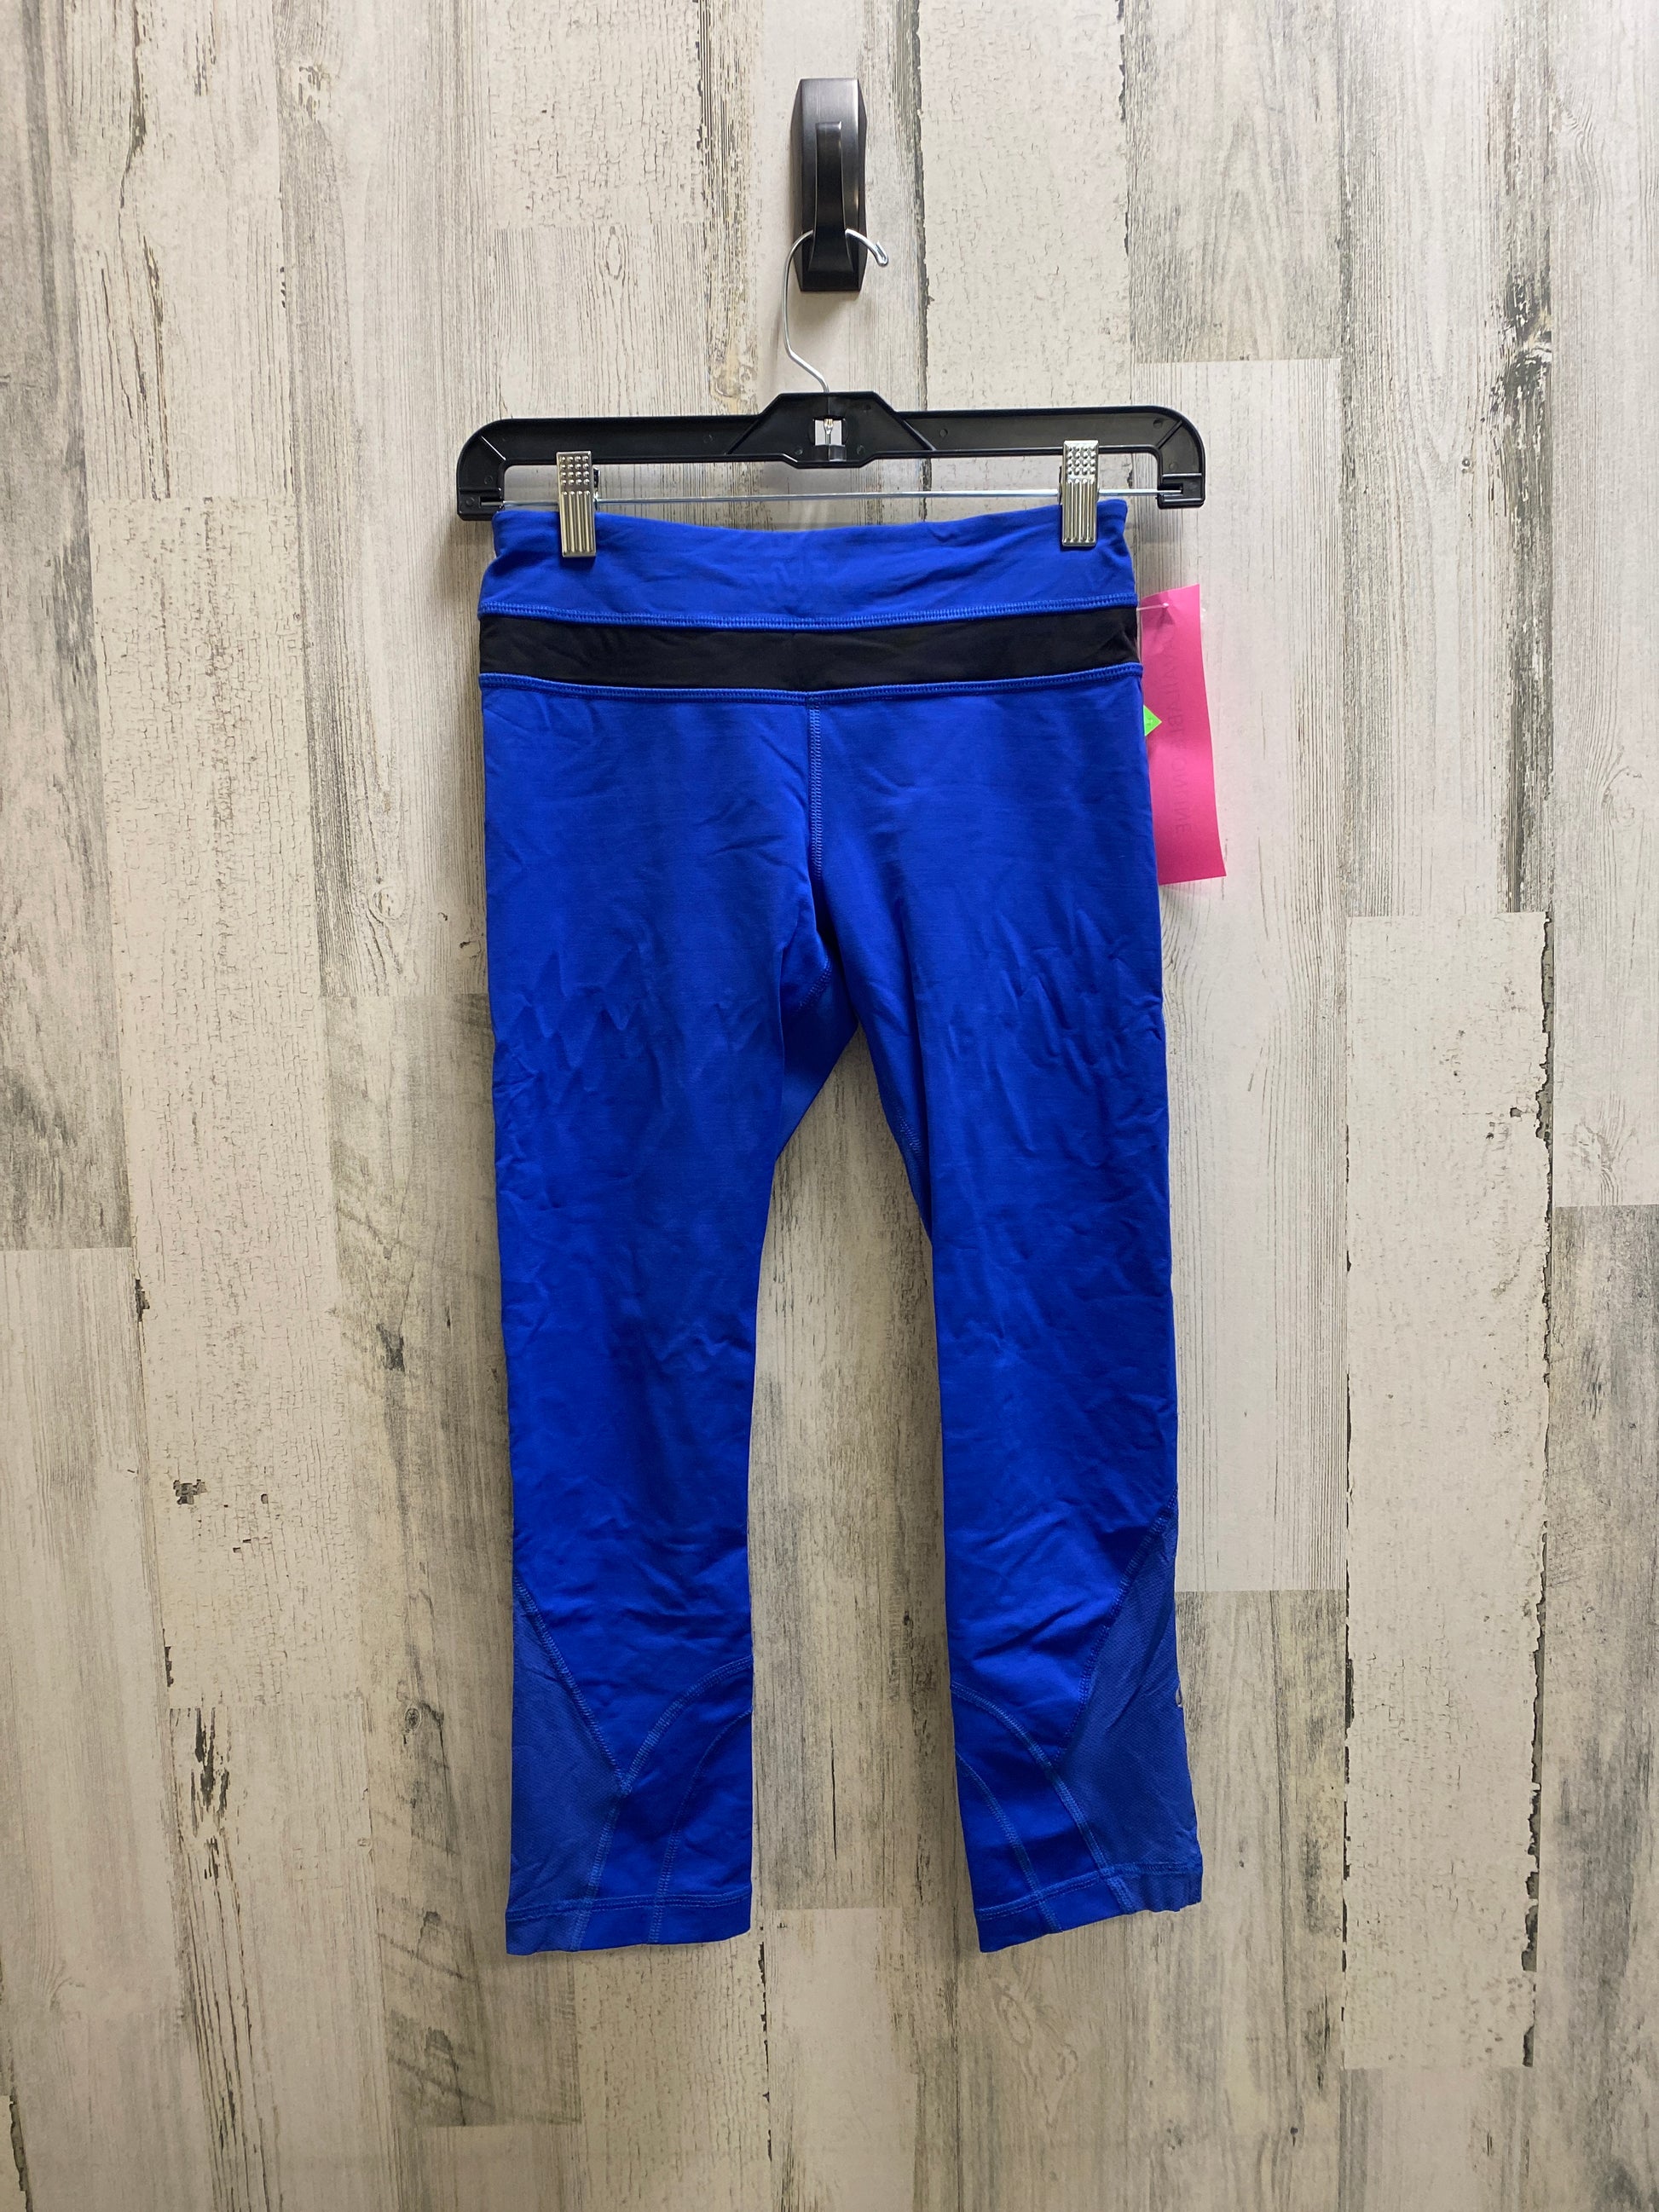 Athletic Leggings By Lululemon Size: 0 – Clothes Mentor St